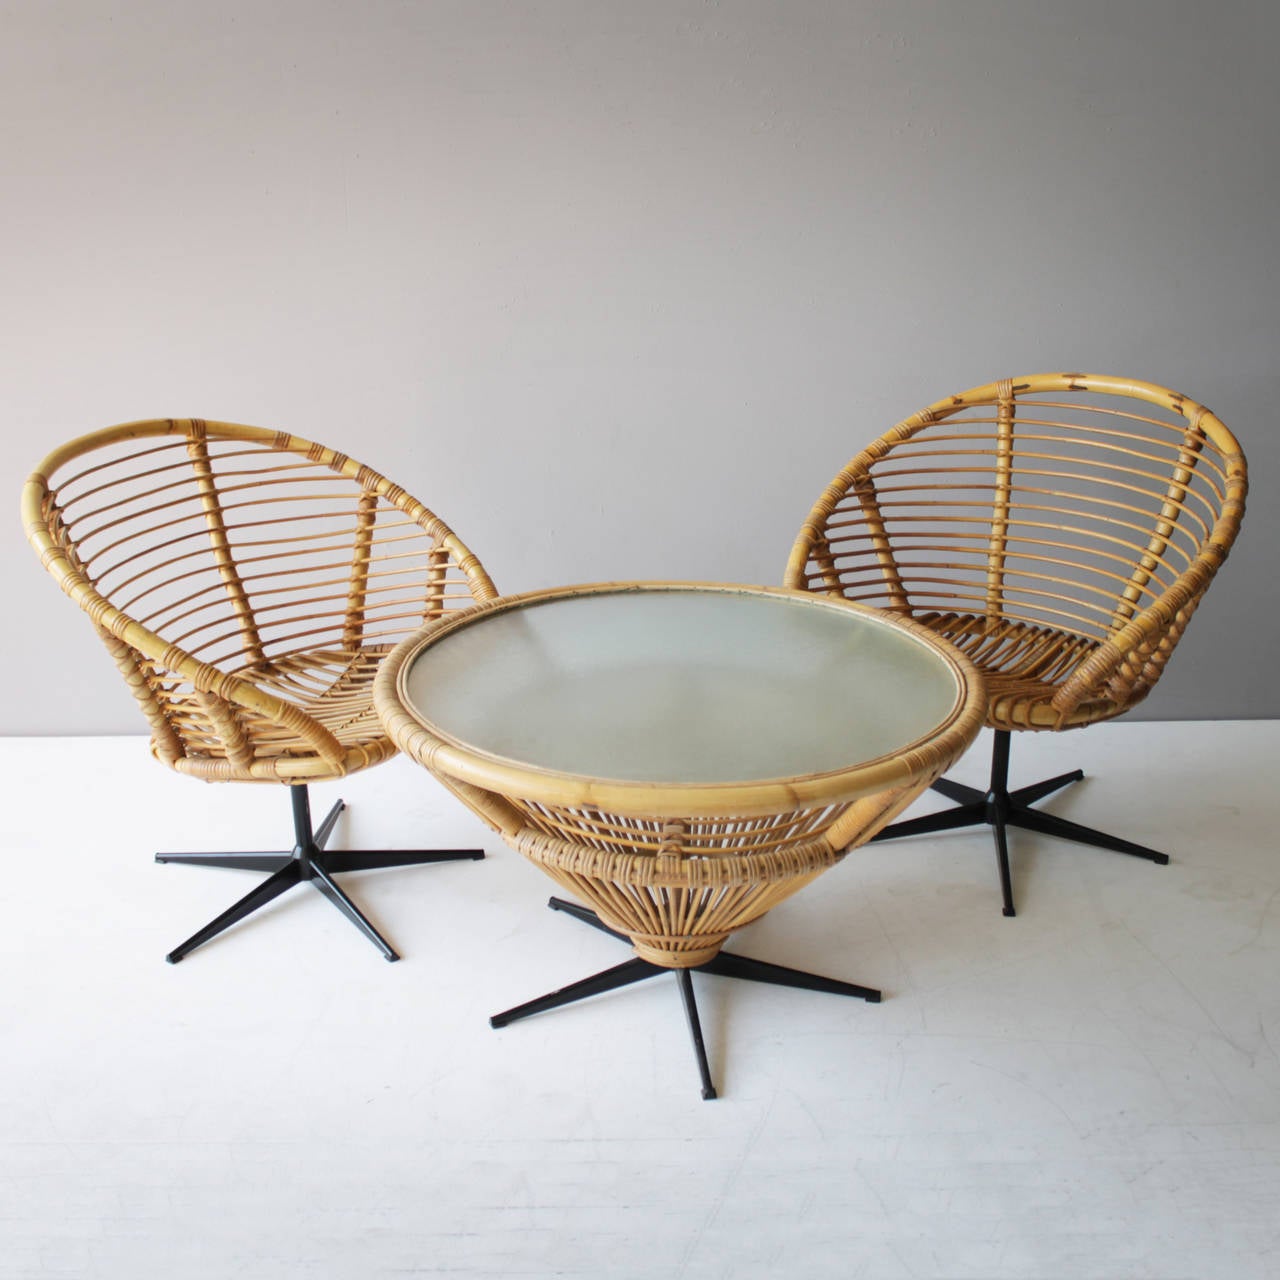 Set of four rattan swivel chairs in the style of Franco Albini. Rattan with cane chairs with cushions on a black lacquered metal star base. Beautiful condition. We also offer the matching table (see picture).